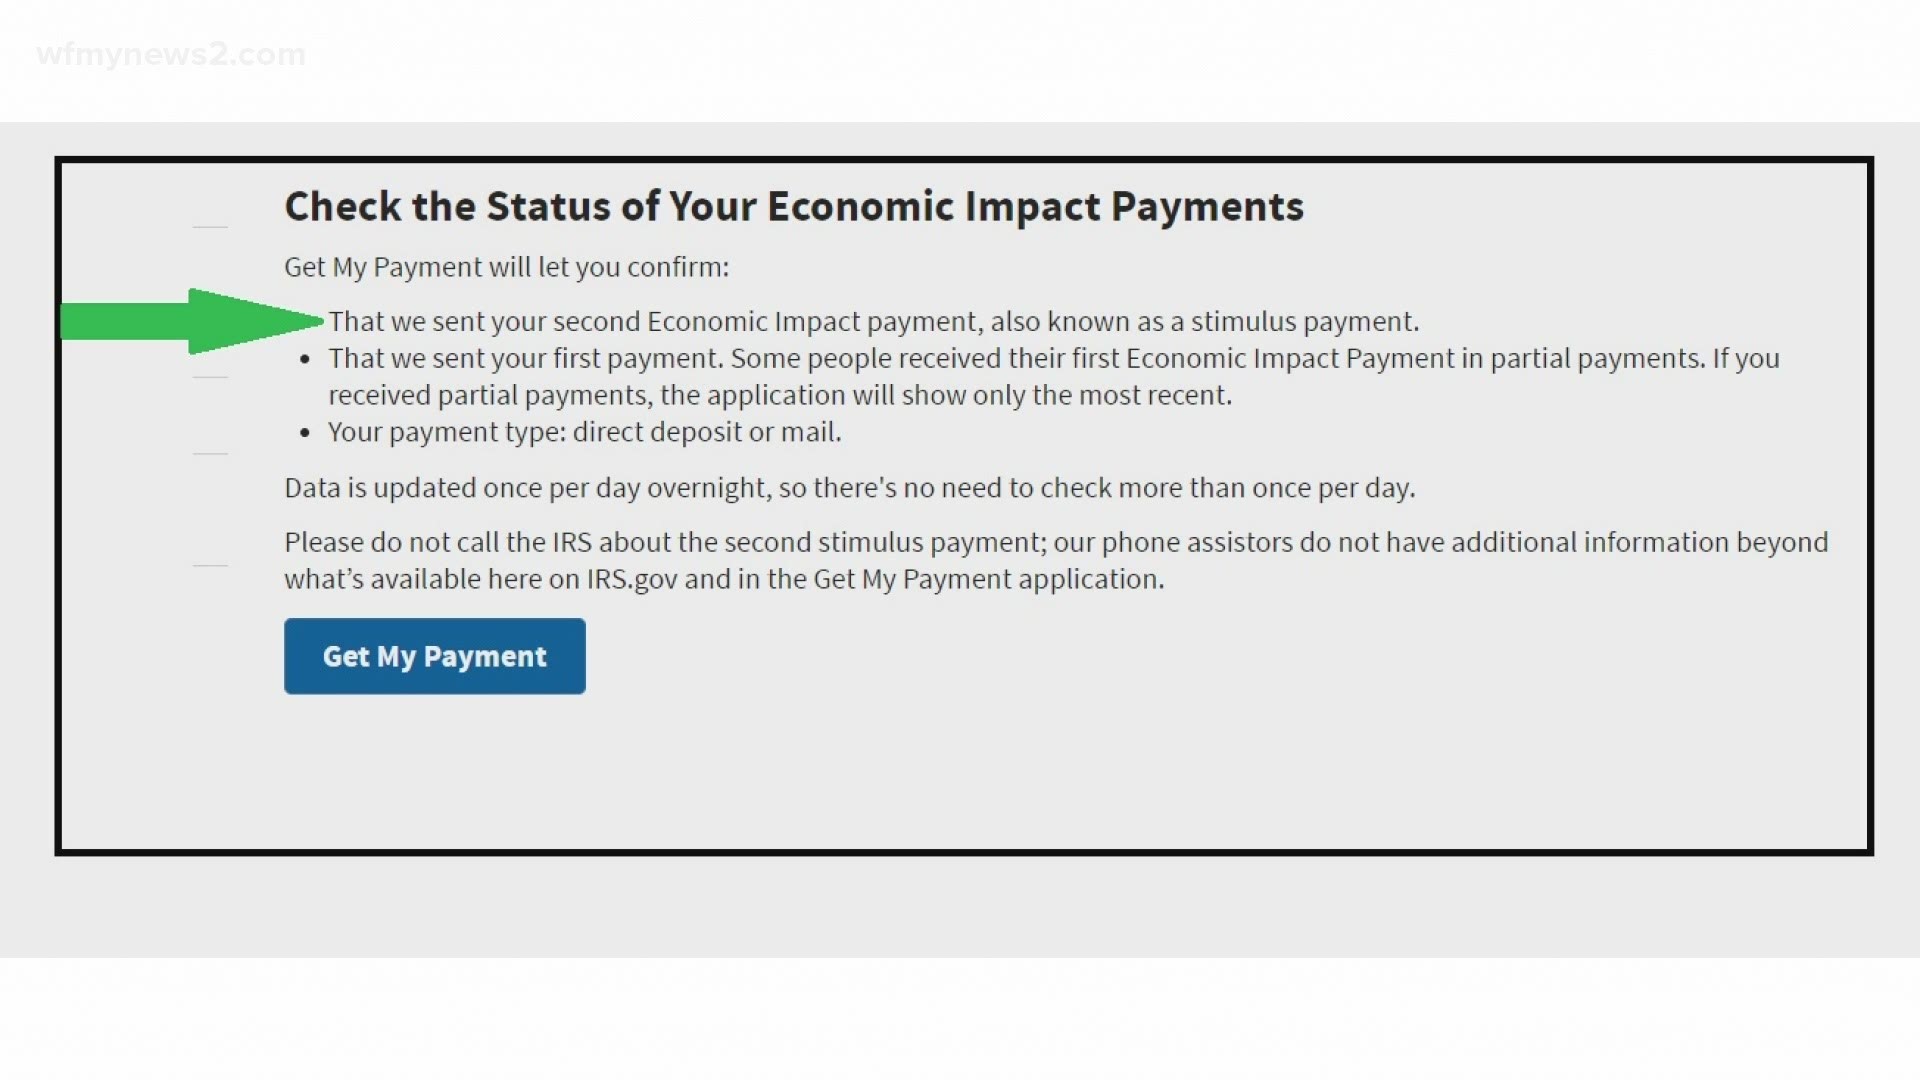 where-is-my-stimulus-payment-how-to-check-the-status-wfmynews2